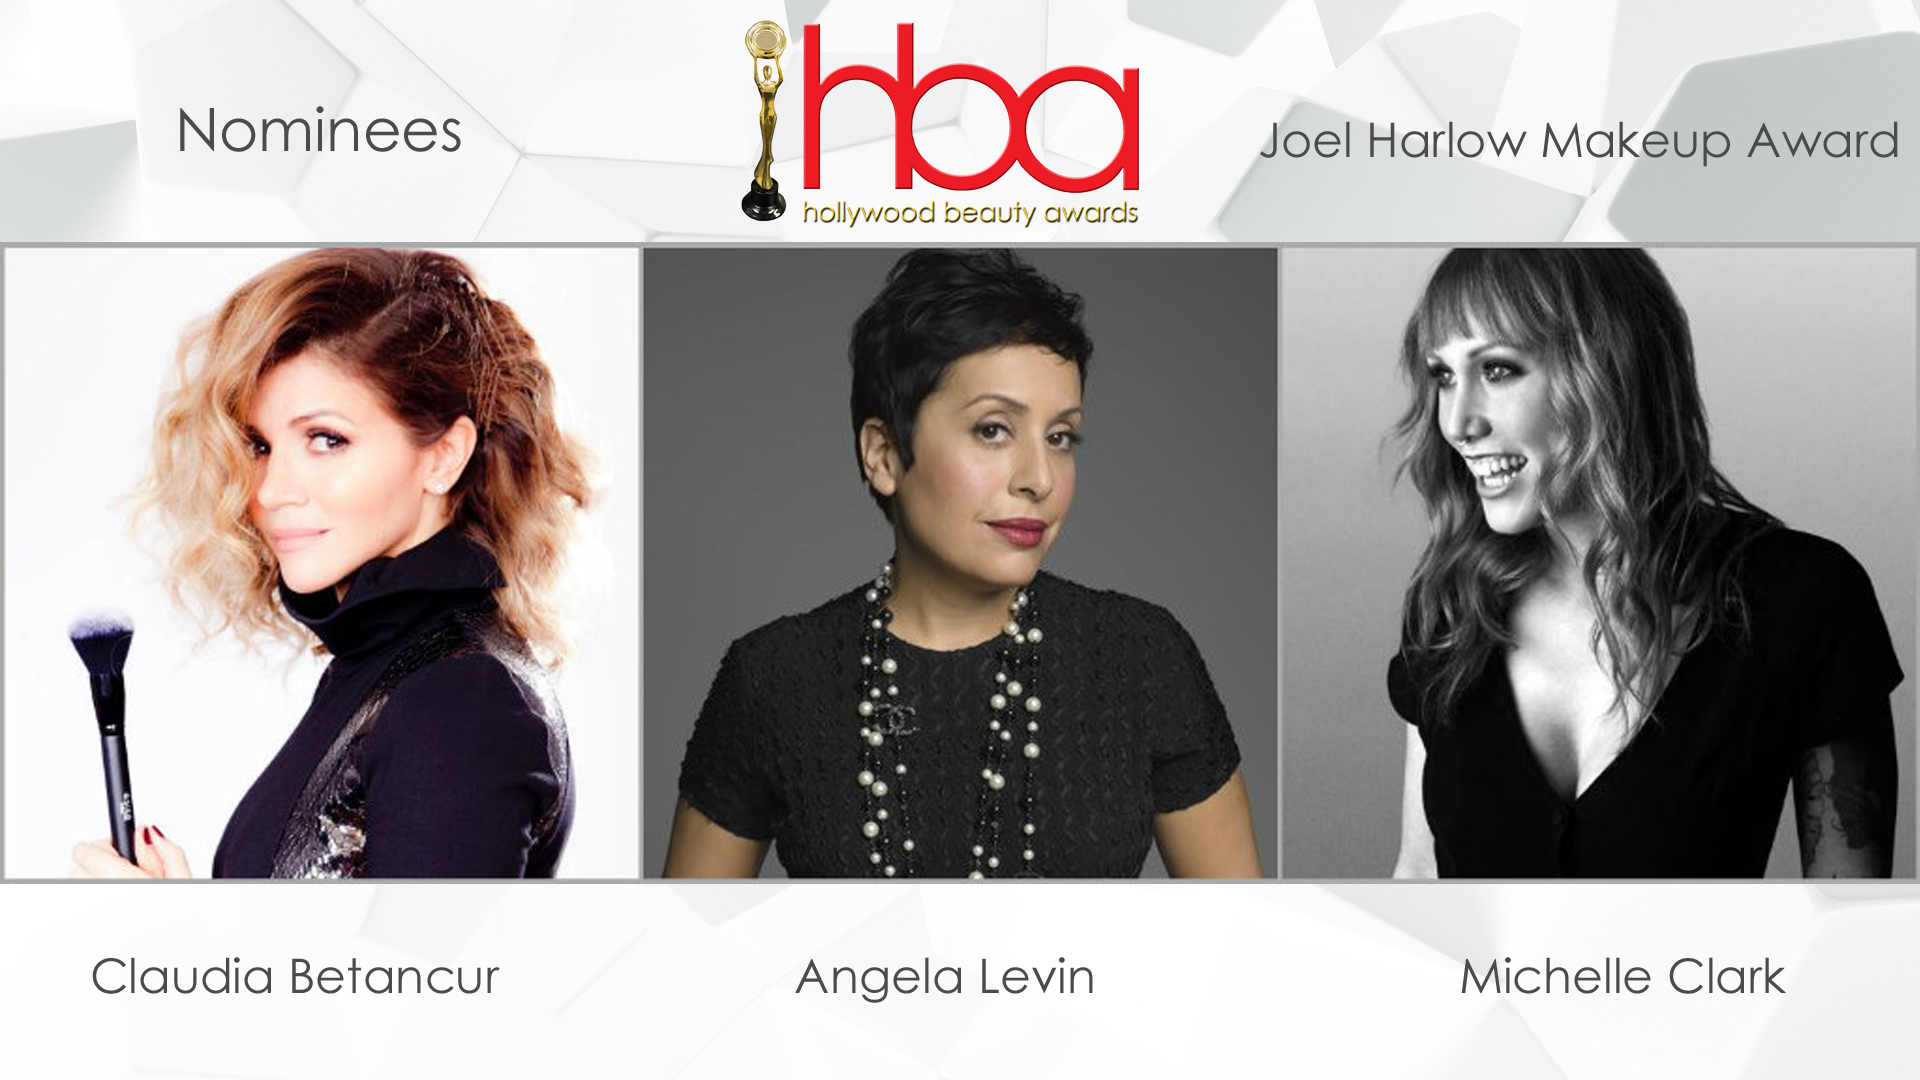 Claudia Betancur, Angela Levin, Michelle Clark, 2017 Hollywood Beauty Awards makeup nominees